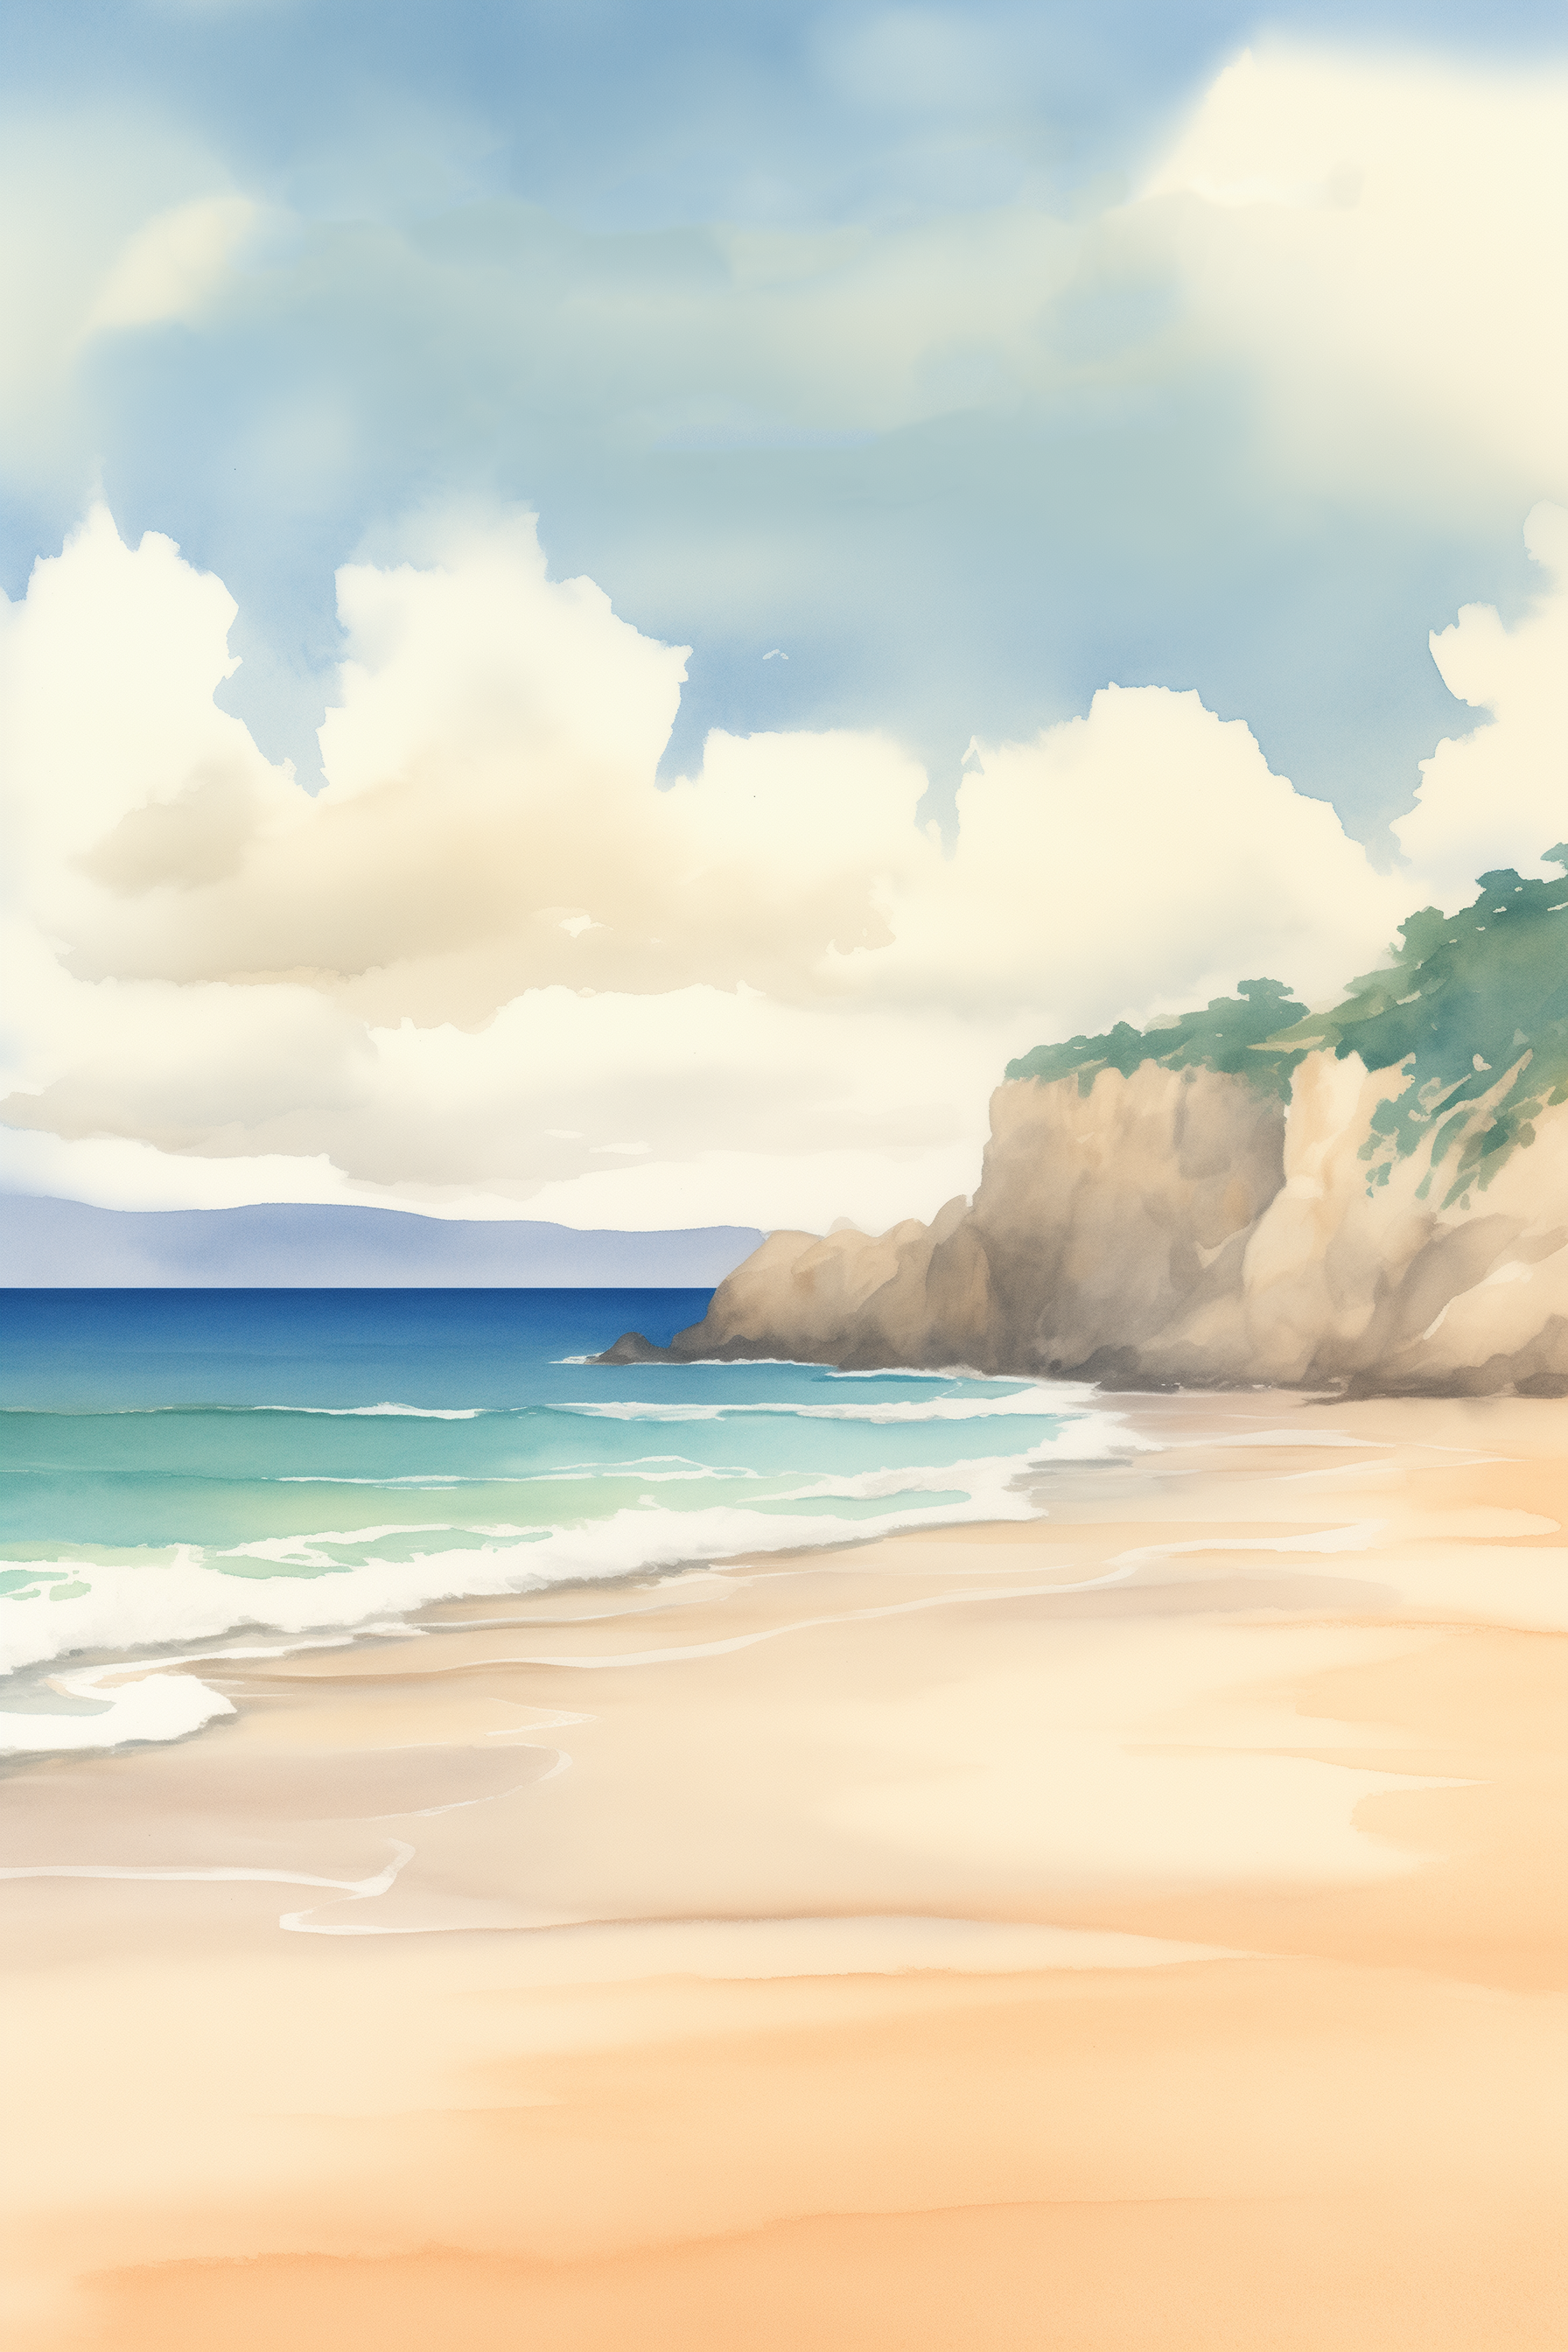 A painting of a beach with a cliff.